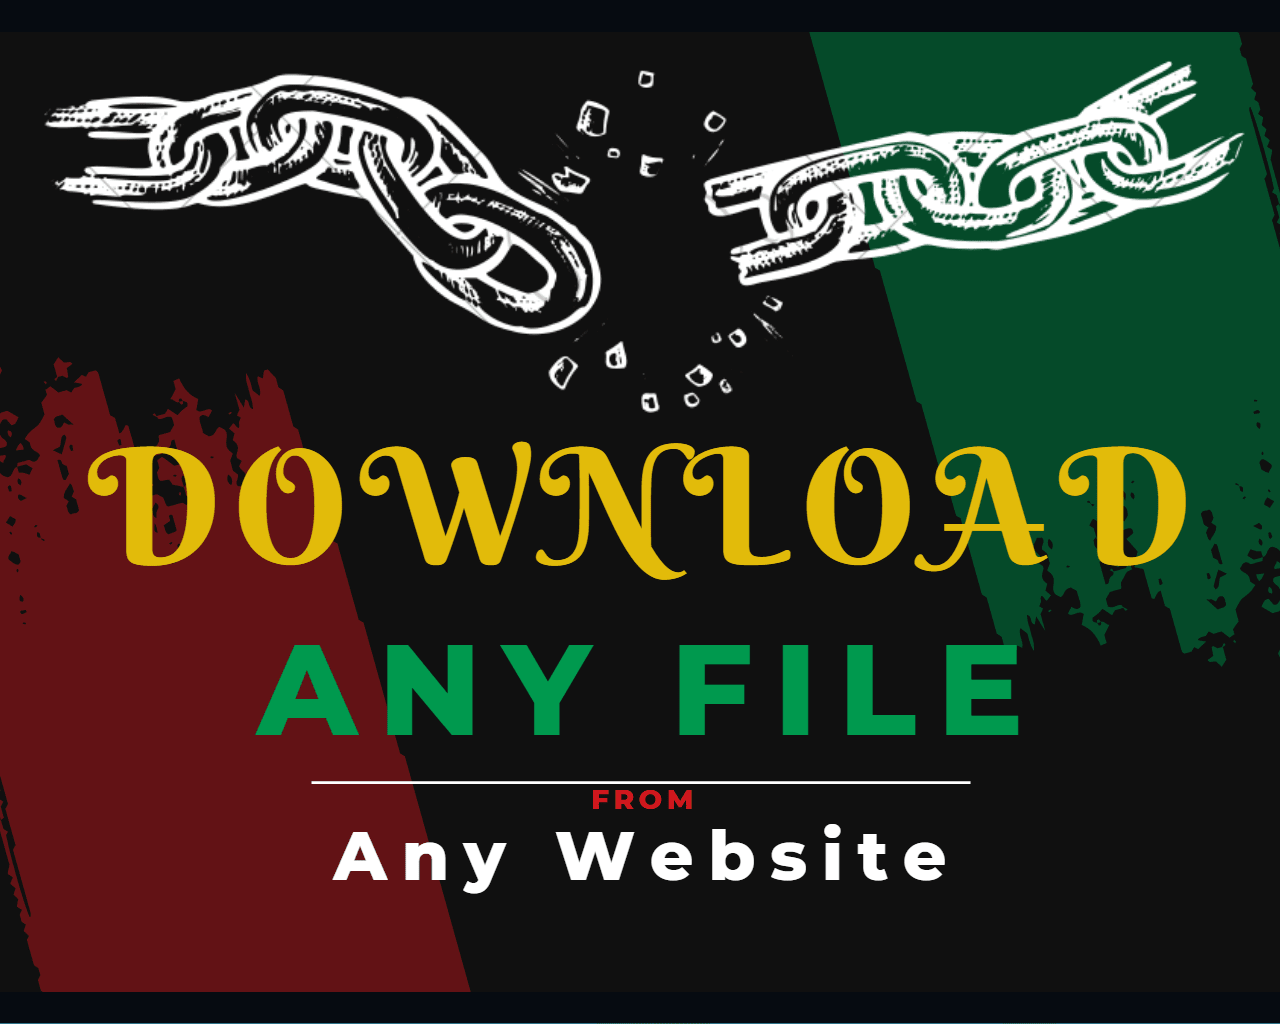 I will download any file from any website